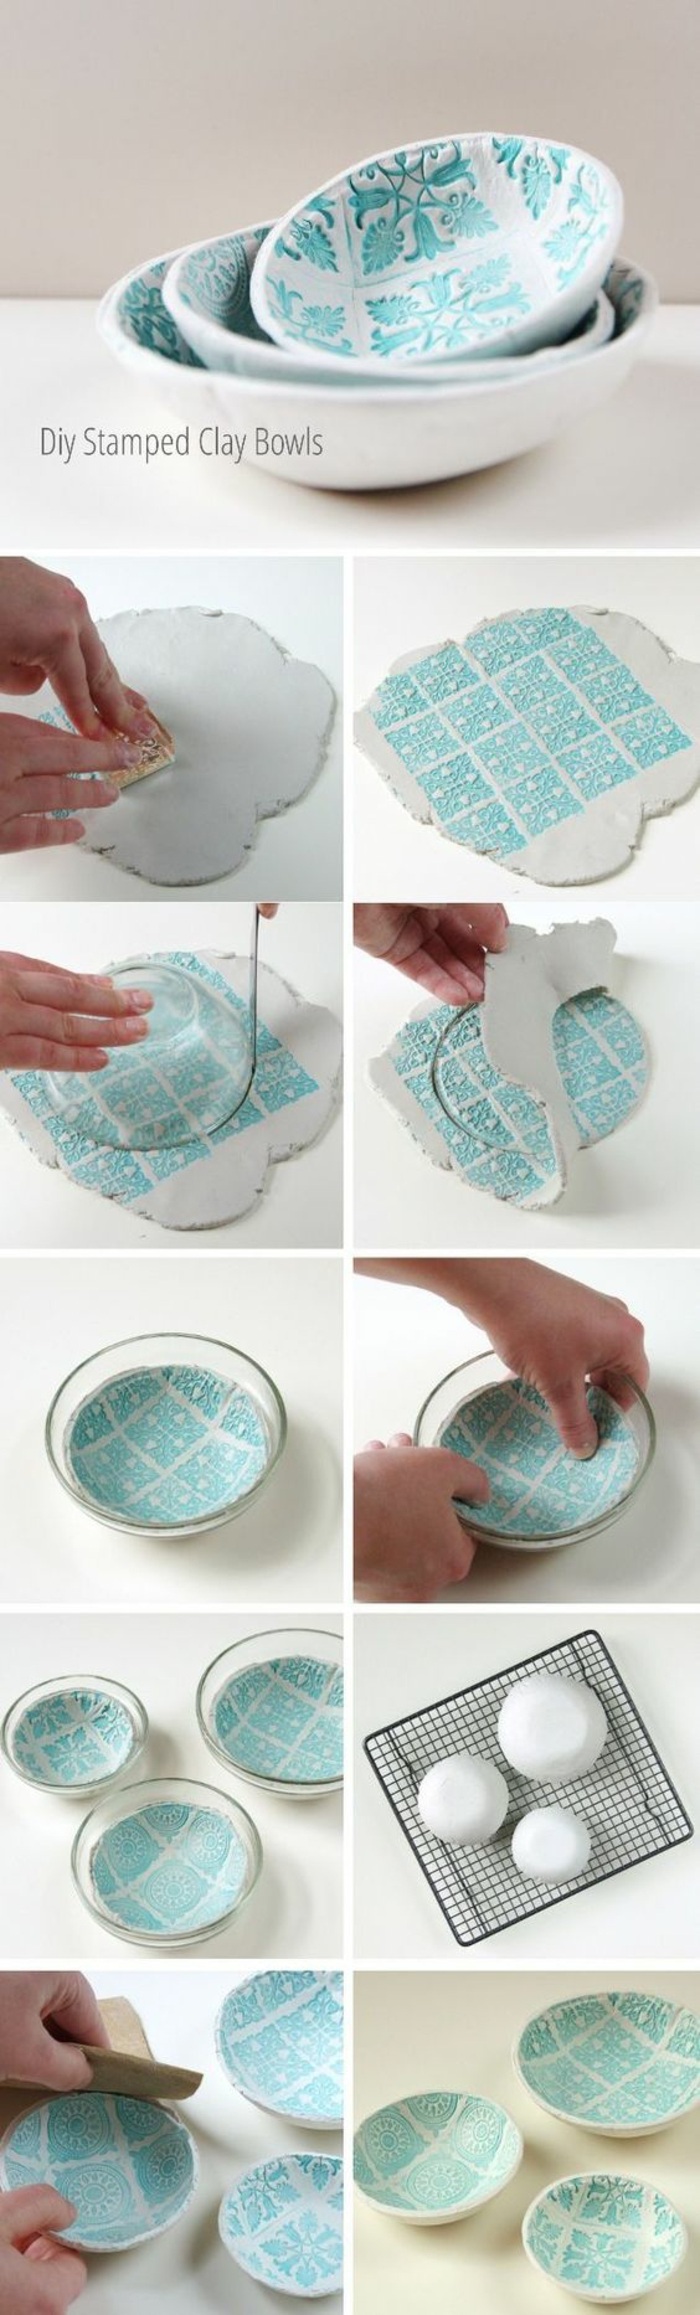 stamped clay bowls, step by step, diy tutorial, crafts to make and sell, turquoise print